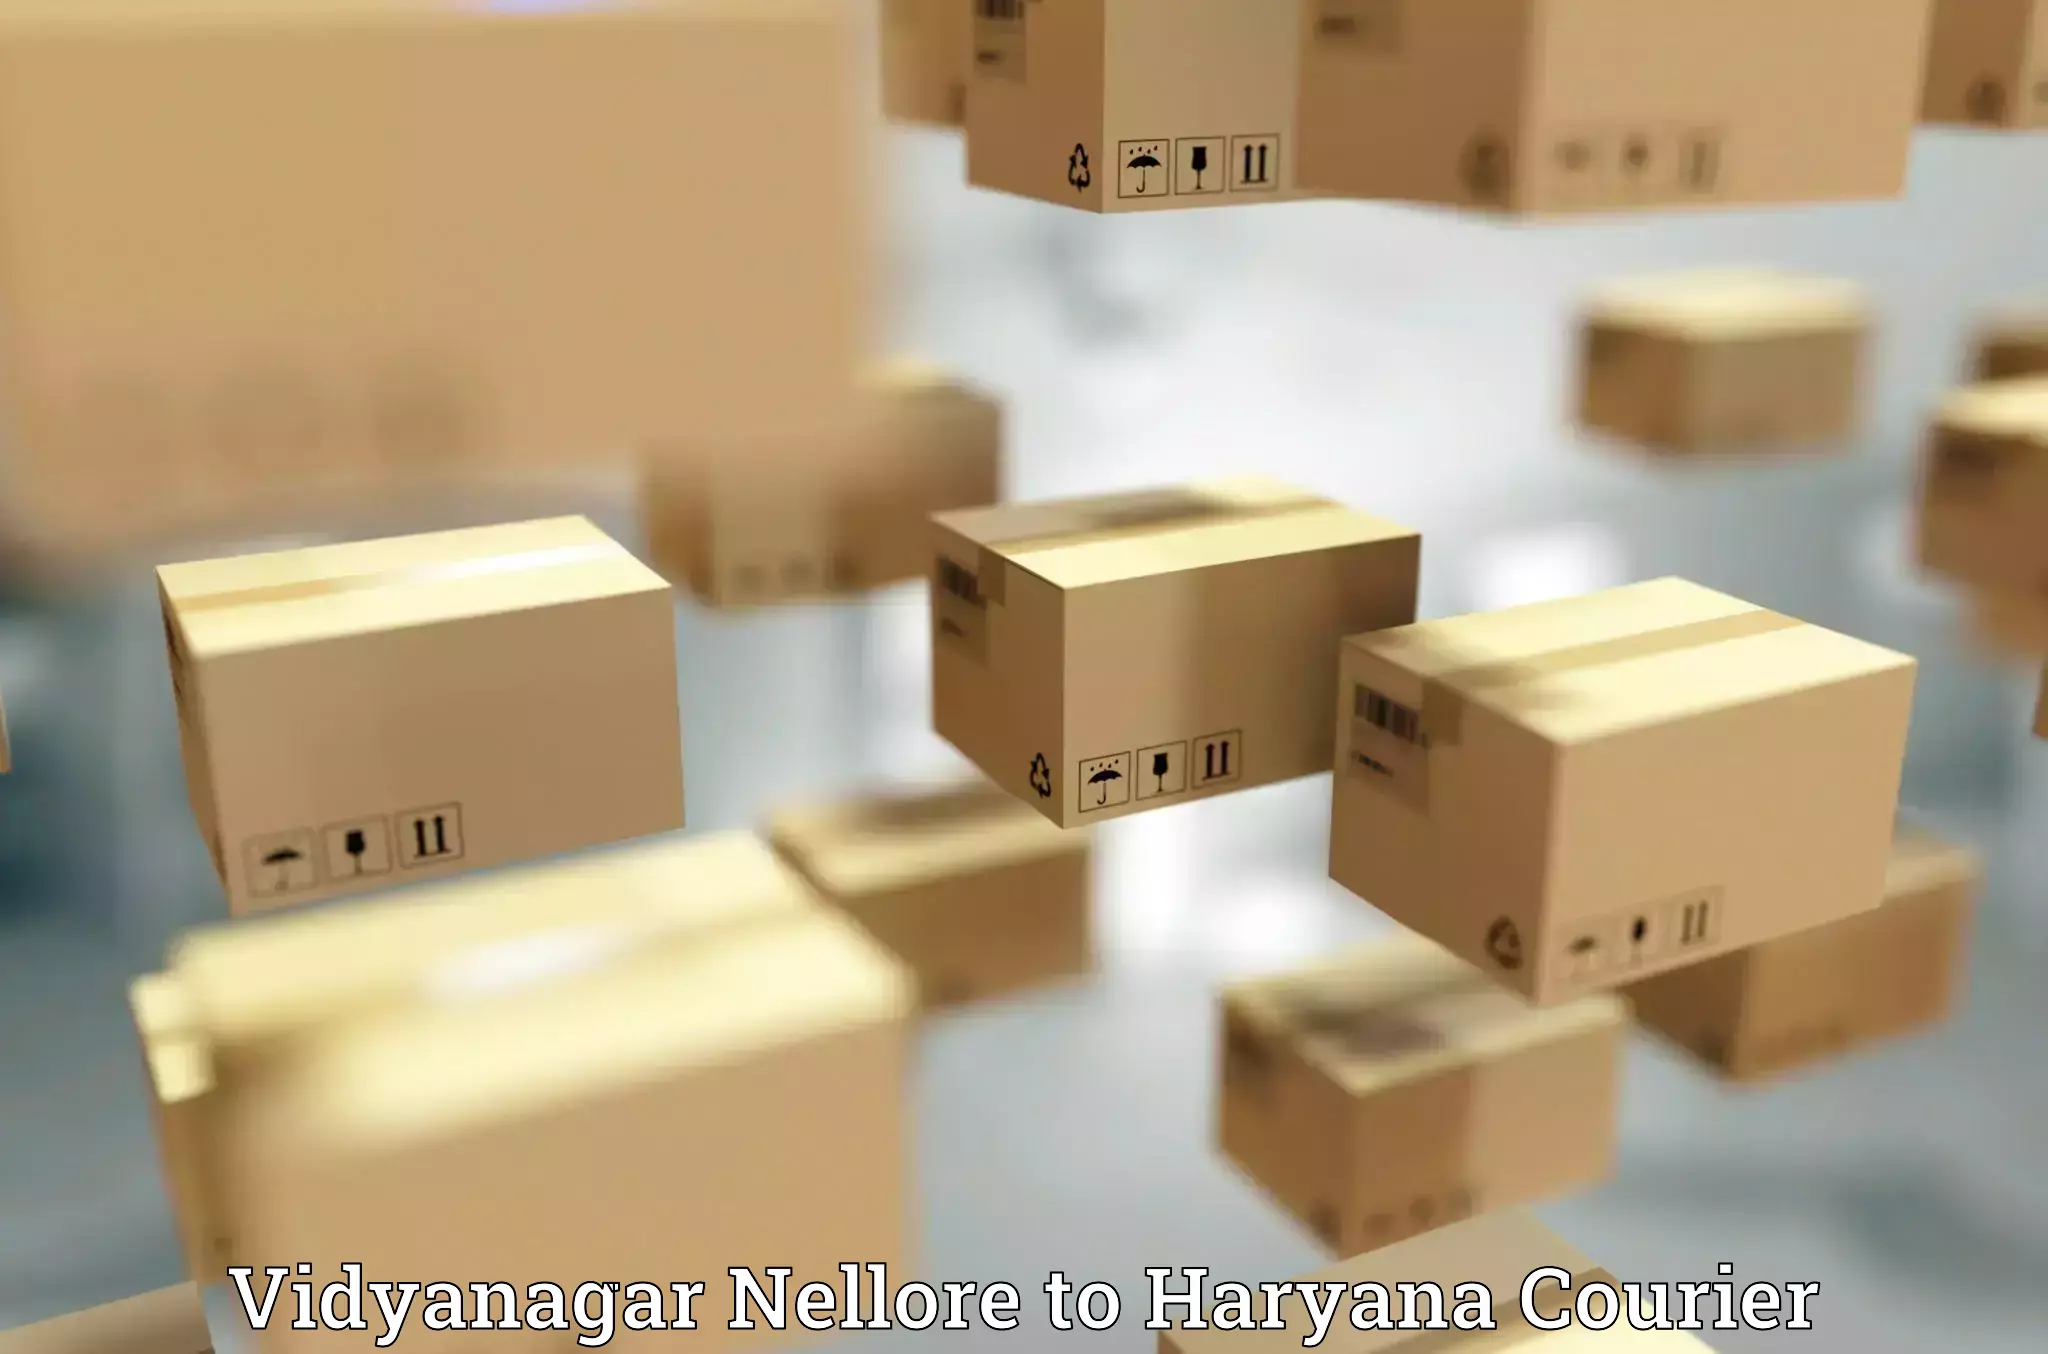 Hassle-free luggage shipping in Vidyanagar Nellore to Haryana